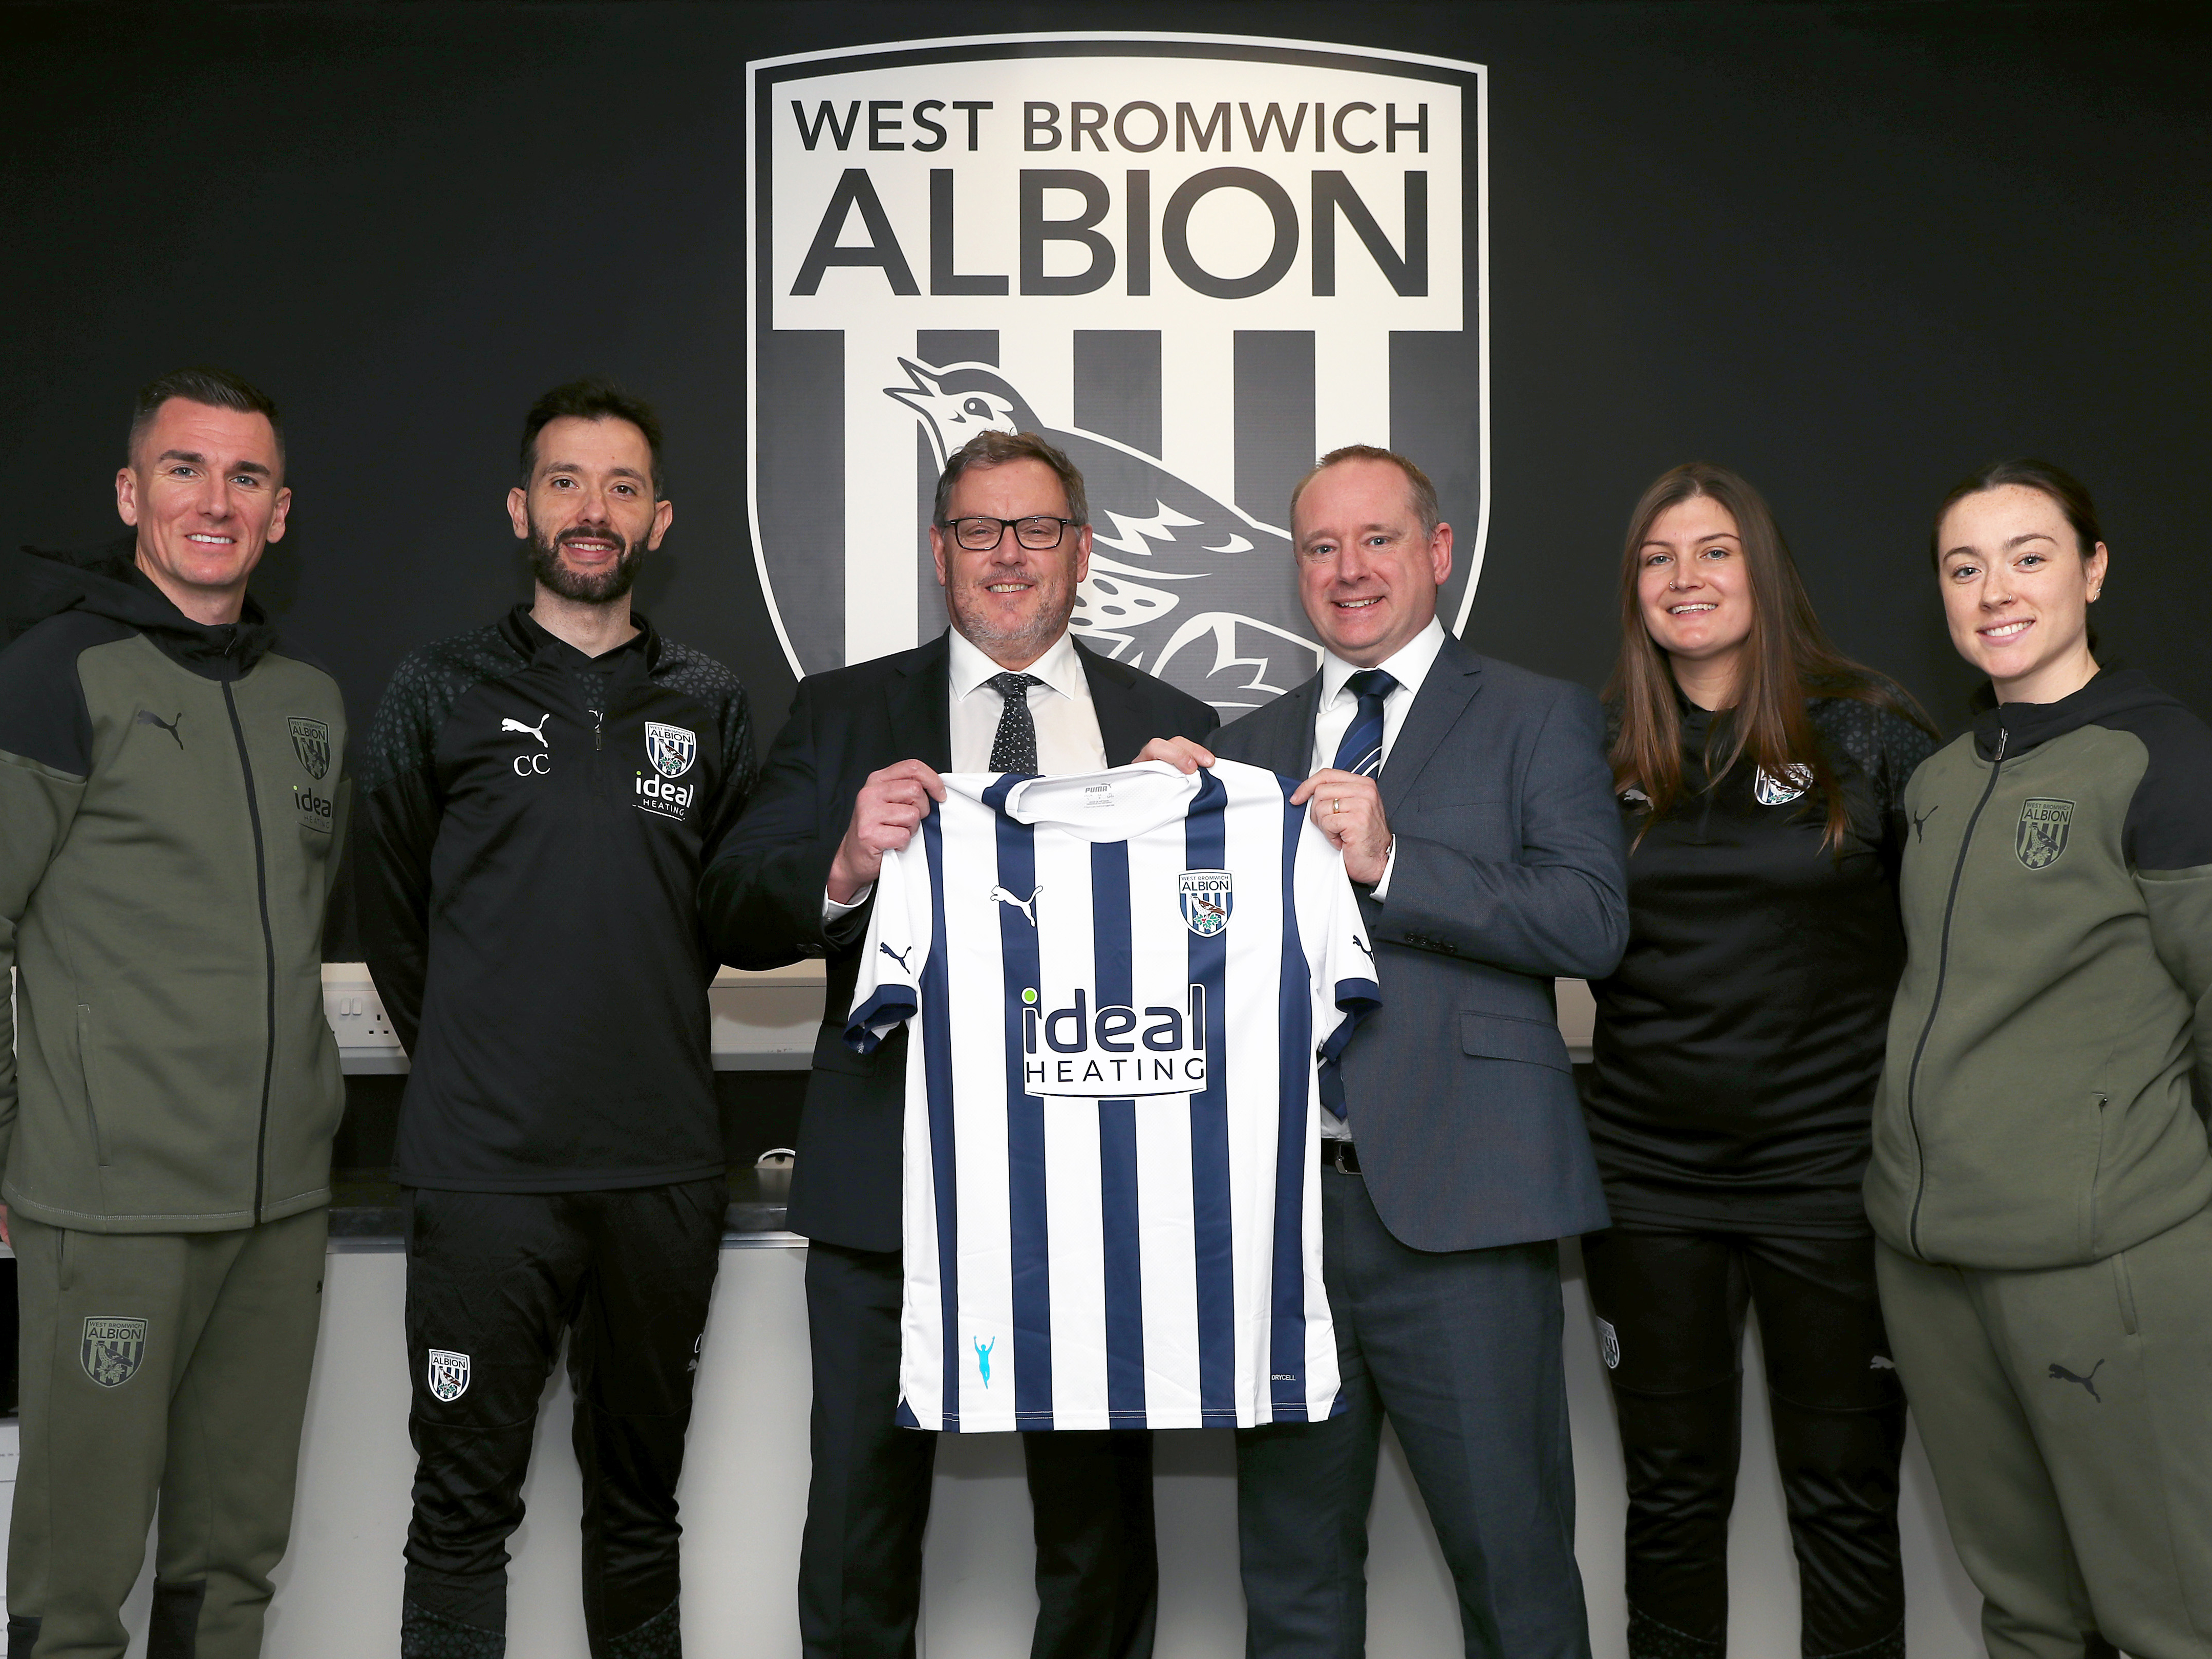 An image of Albion's men's and women's head coaches, players, Managing Director Mark Miles and Ideal Heating CEO Shaun Edwards